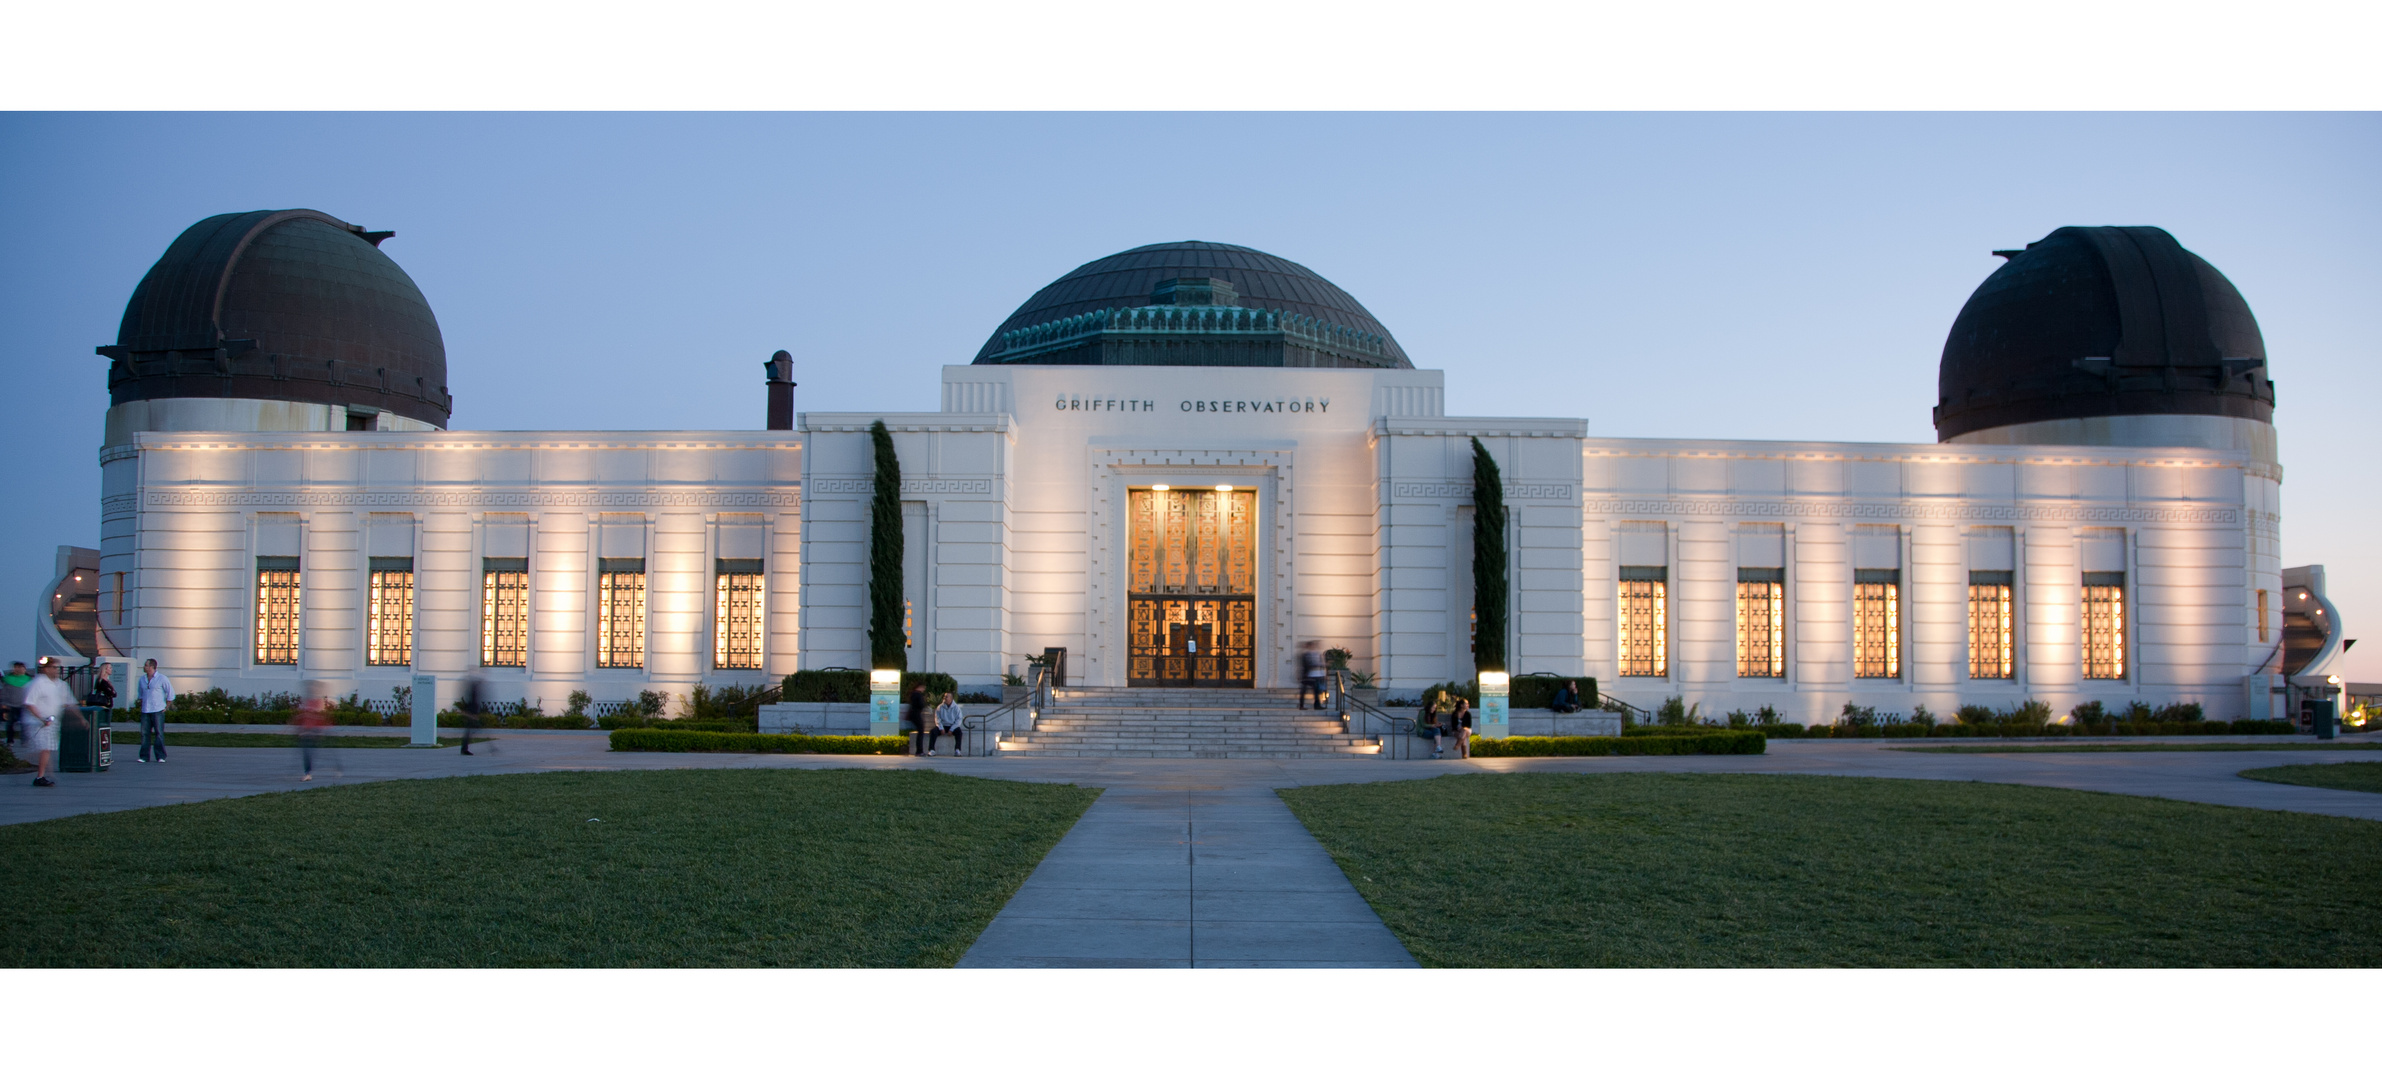 Griffith Observatory (Los Angeles)